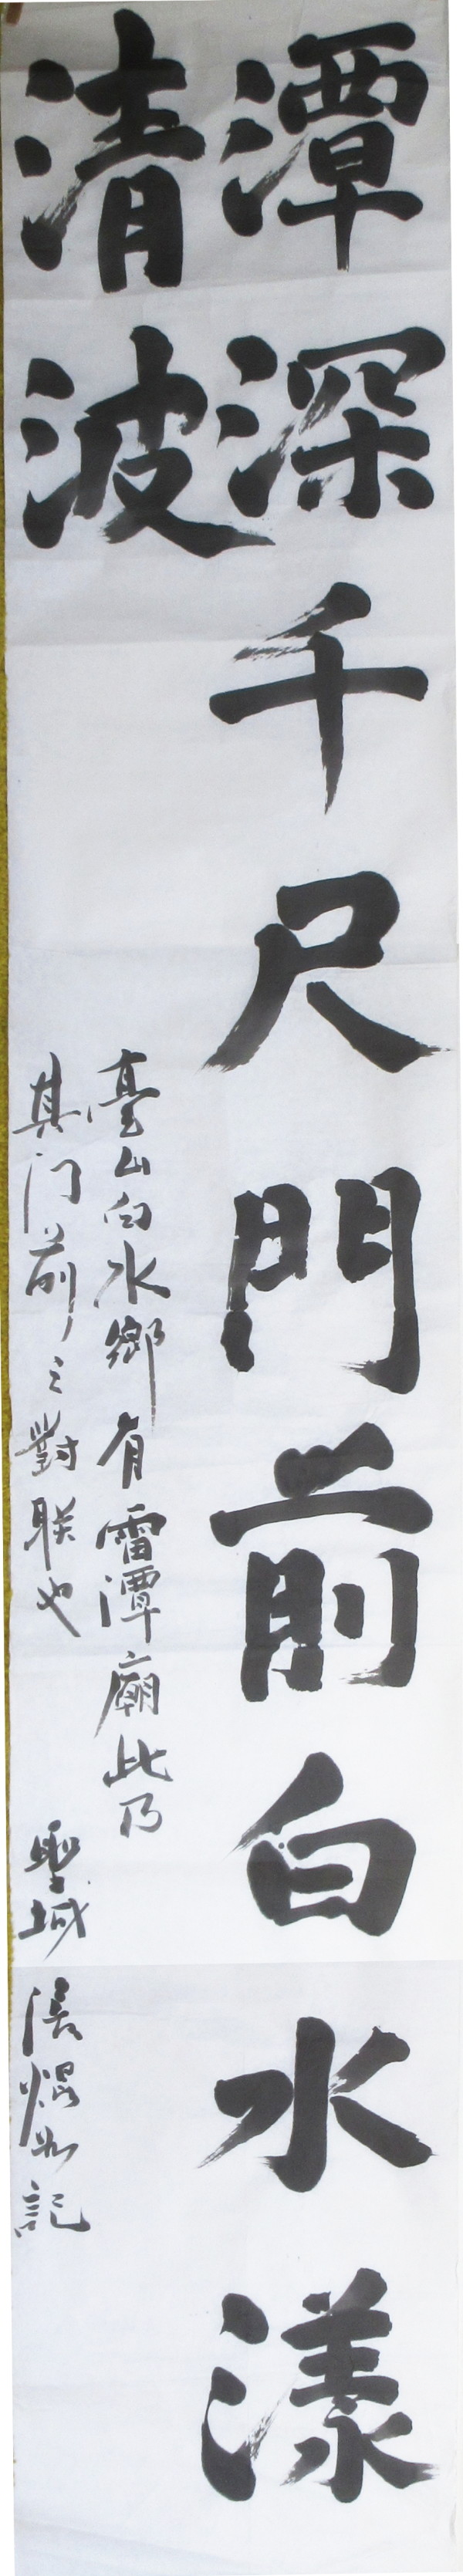 Calligraphy Panel 1 by Kwan Y. Jung